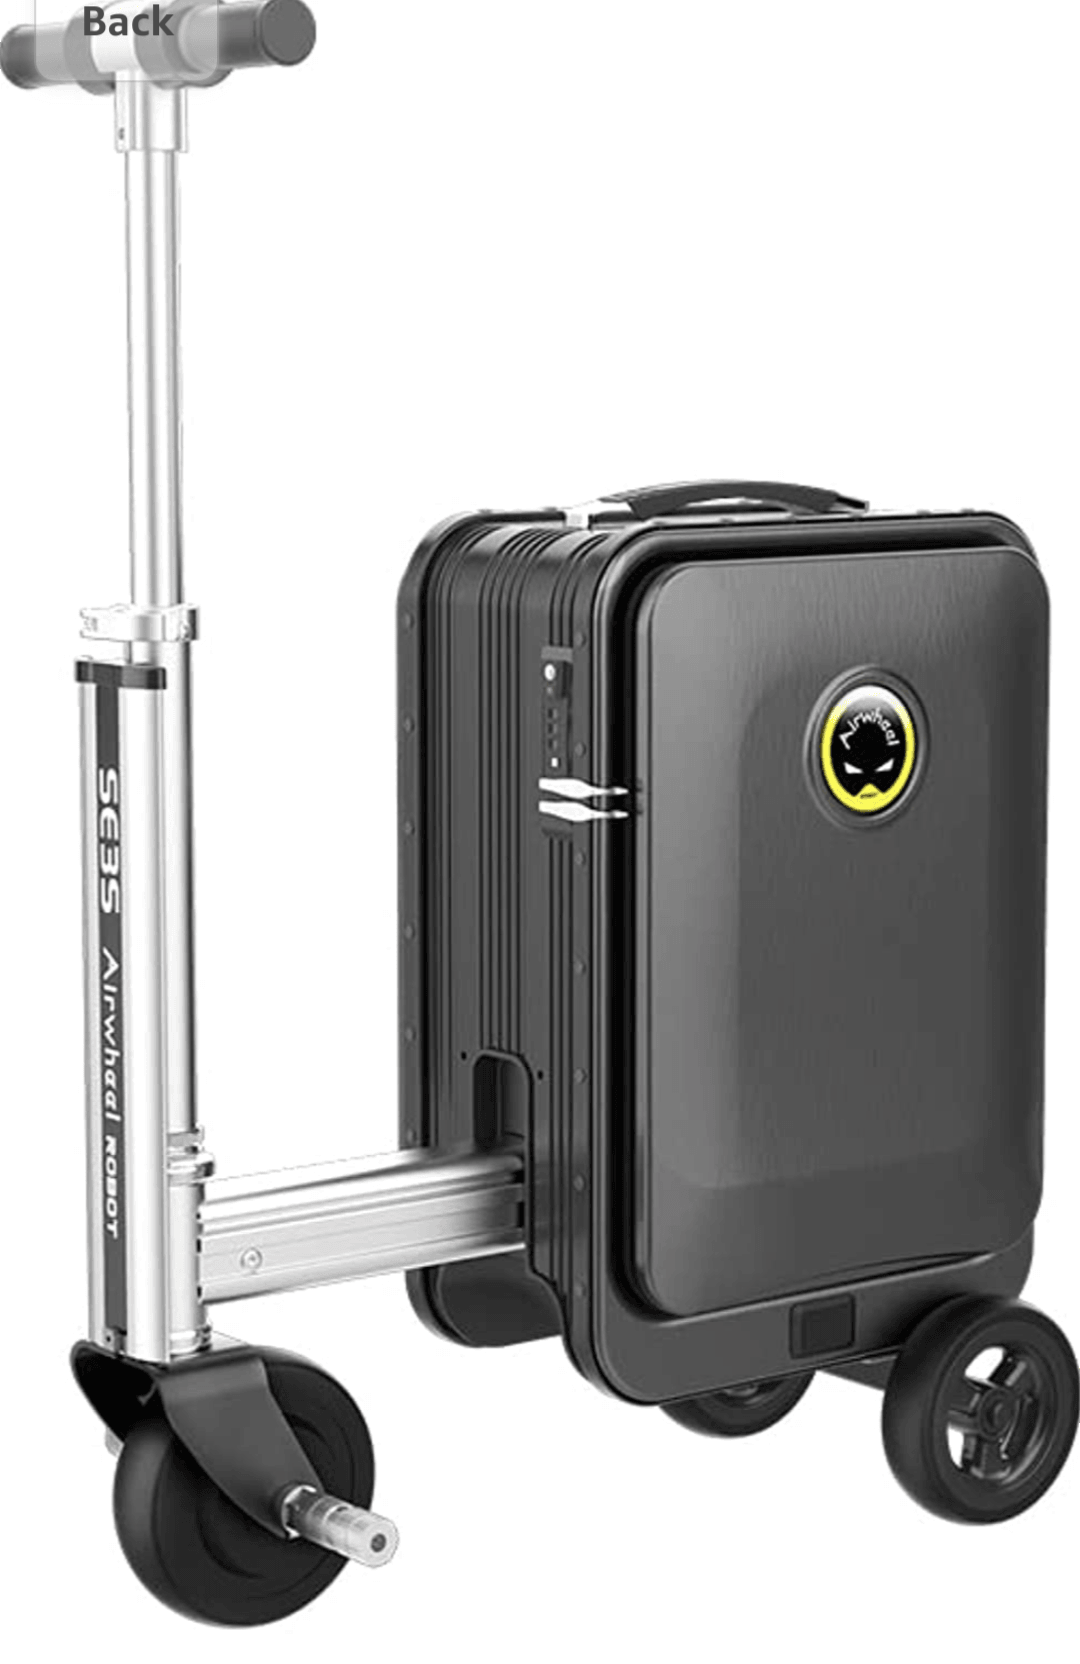 Airwheel SE3S-smart riding flight luggage - Pogo Cycles available in cycle to work